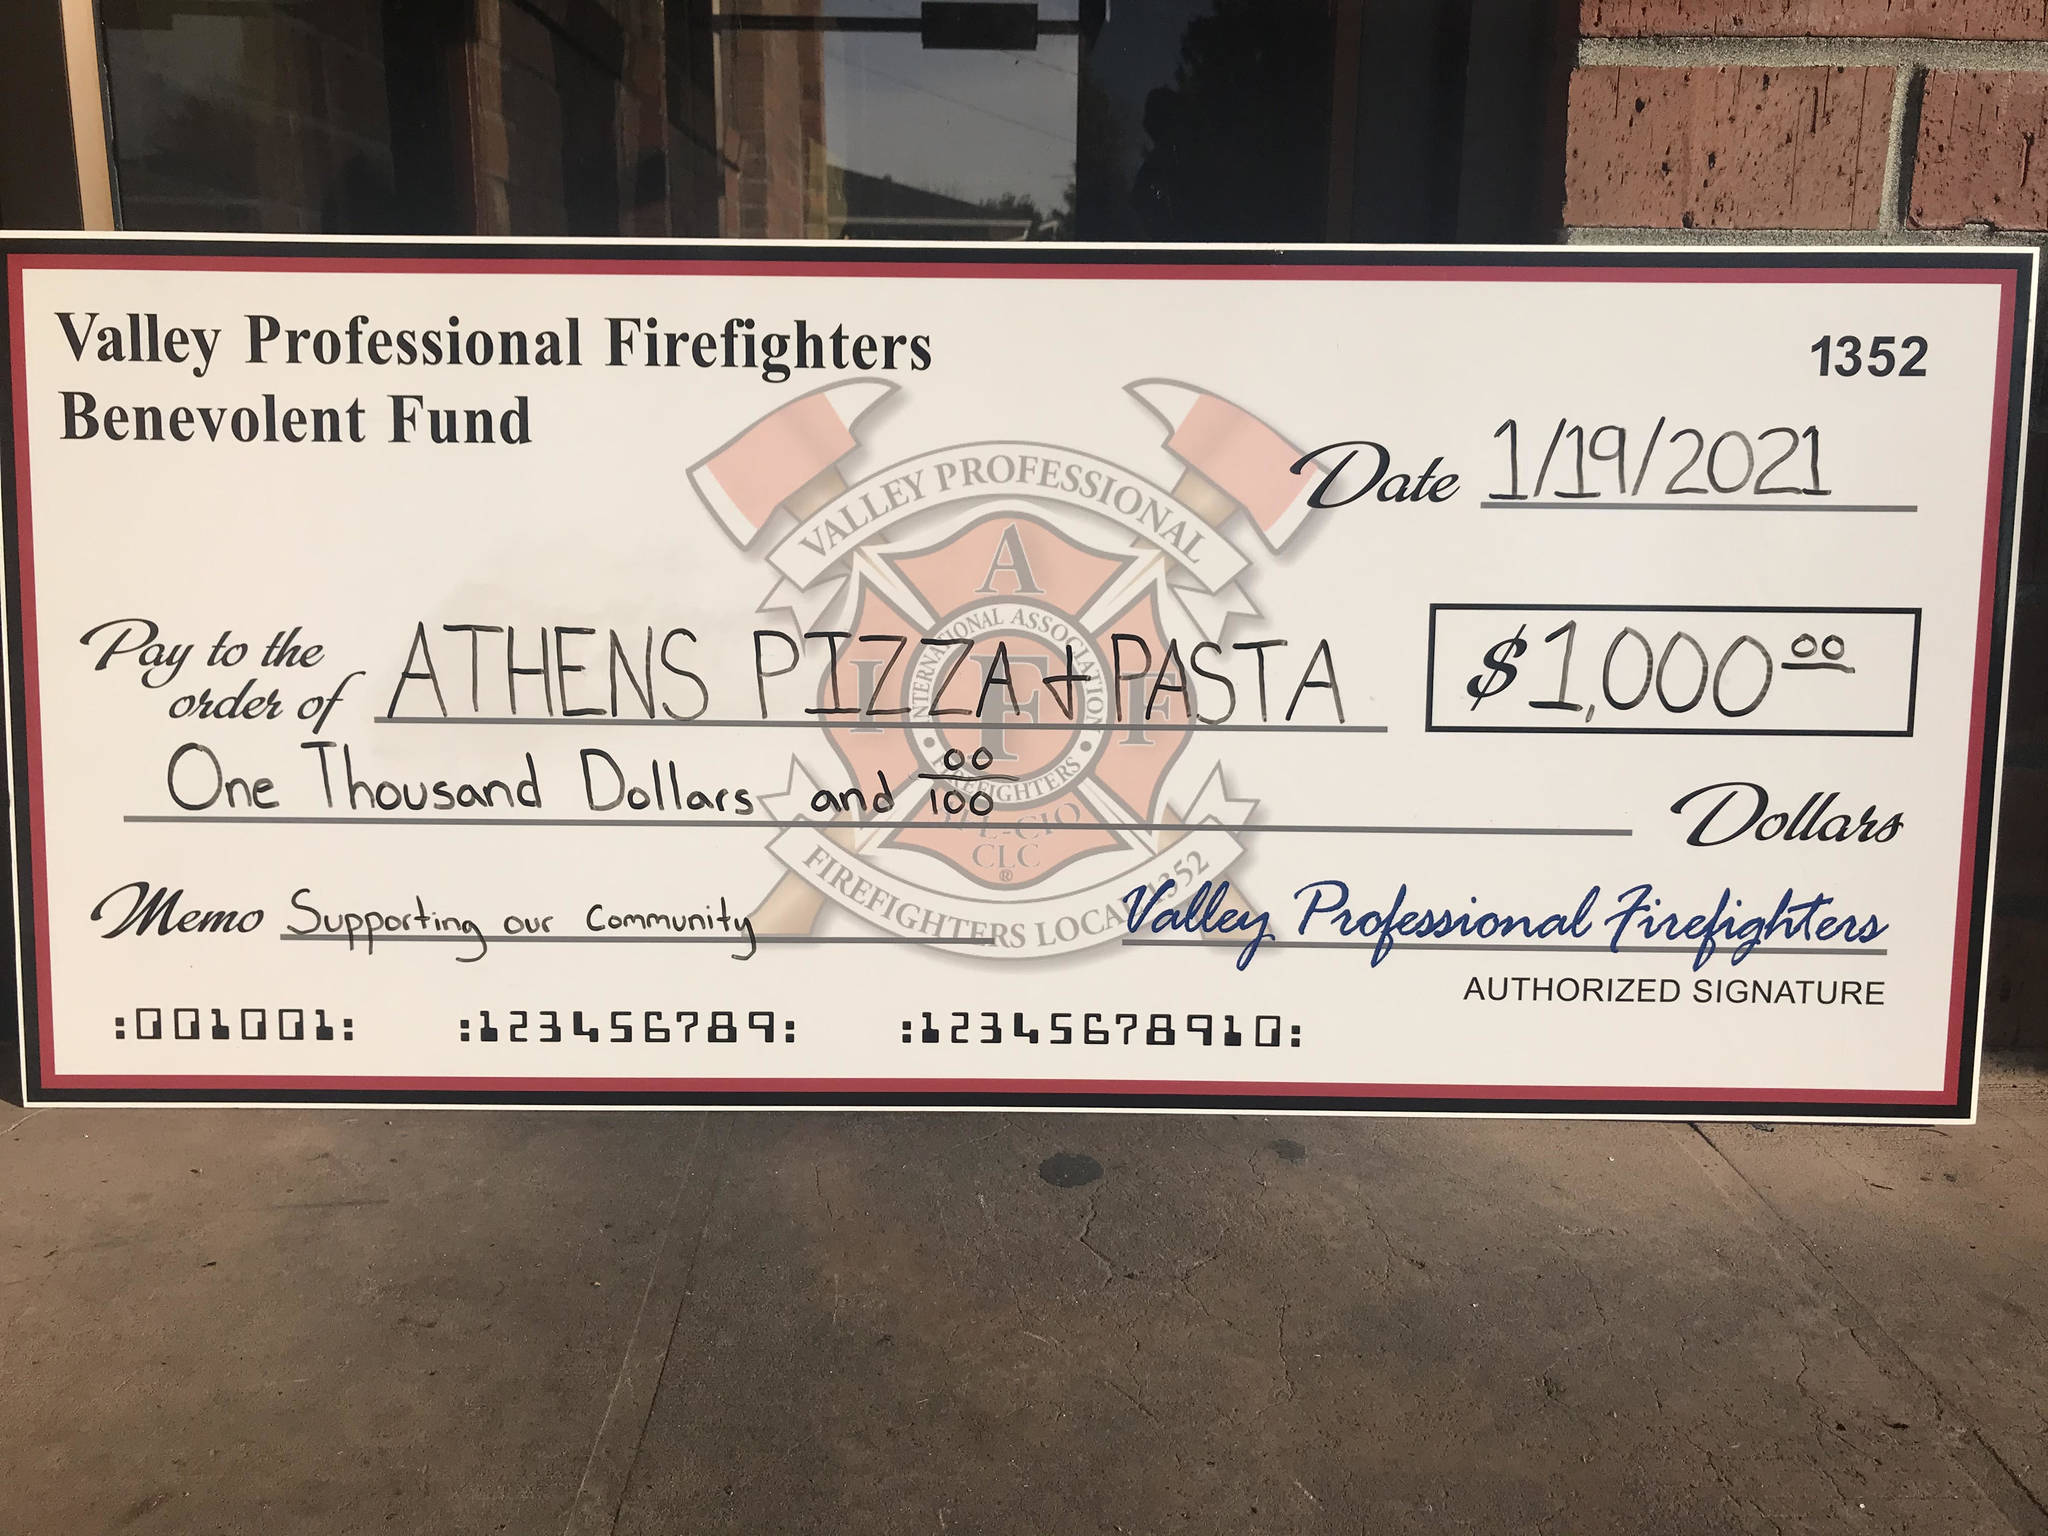 Firefighters on Tuesday donated $1,000 to Athens Pizza and Pasta to help the restaurant continue to pay its employees until it can reopen after effecting necessary repairs following the December fire. Photo courtesy city of Auburn.